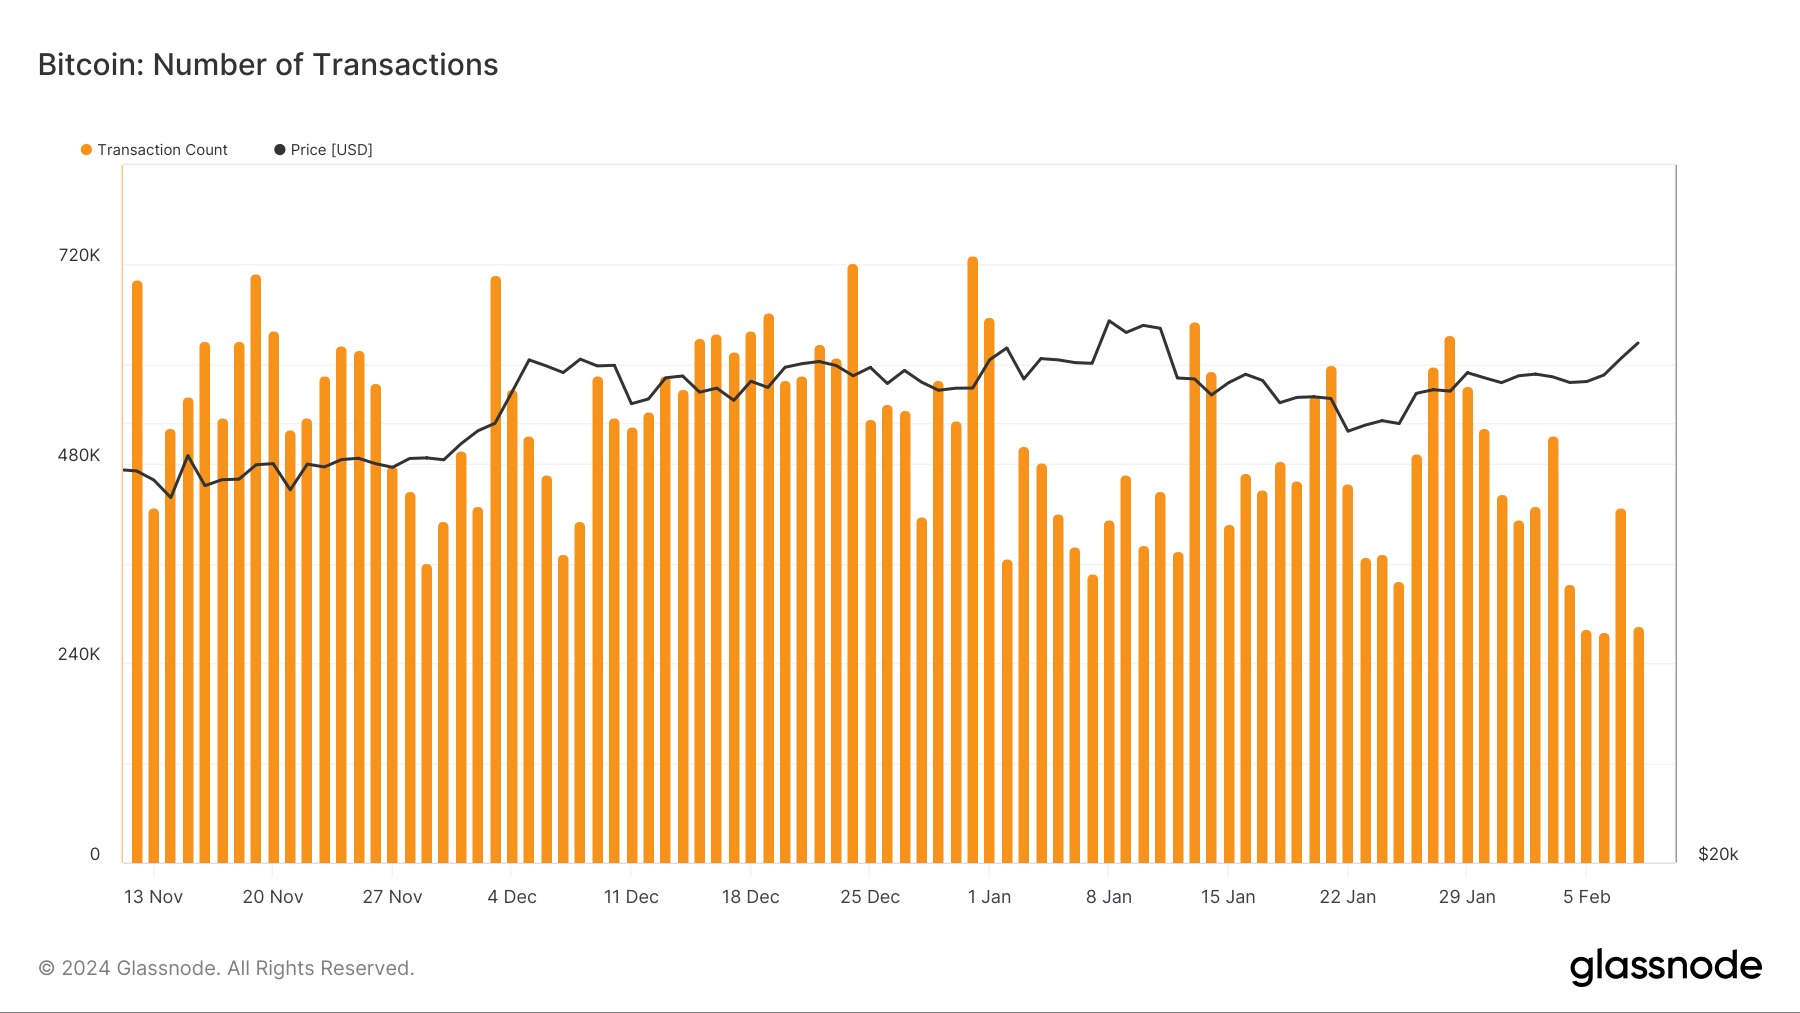 Number of daily transactions on the Bitcoin network (over the last 3 months)